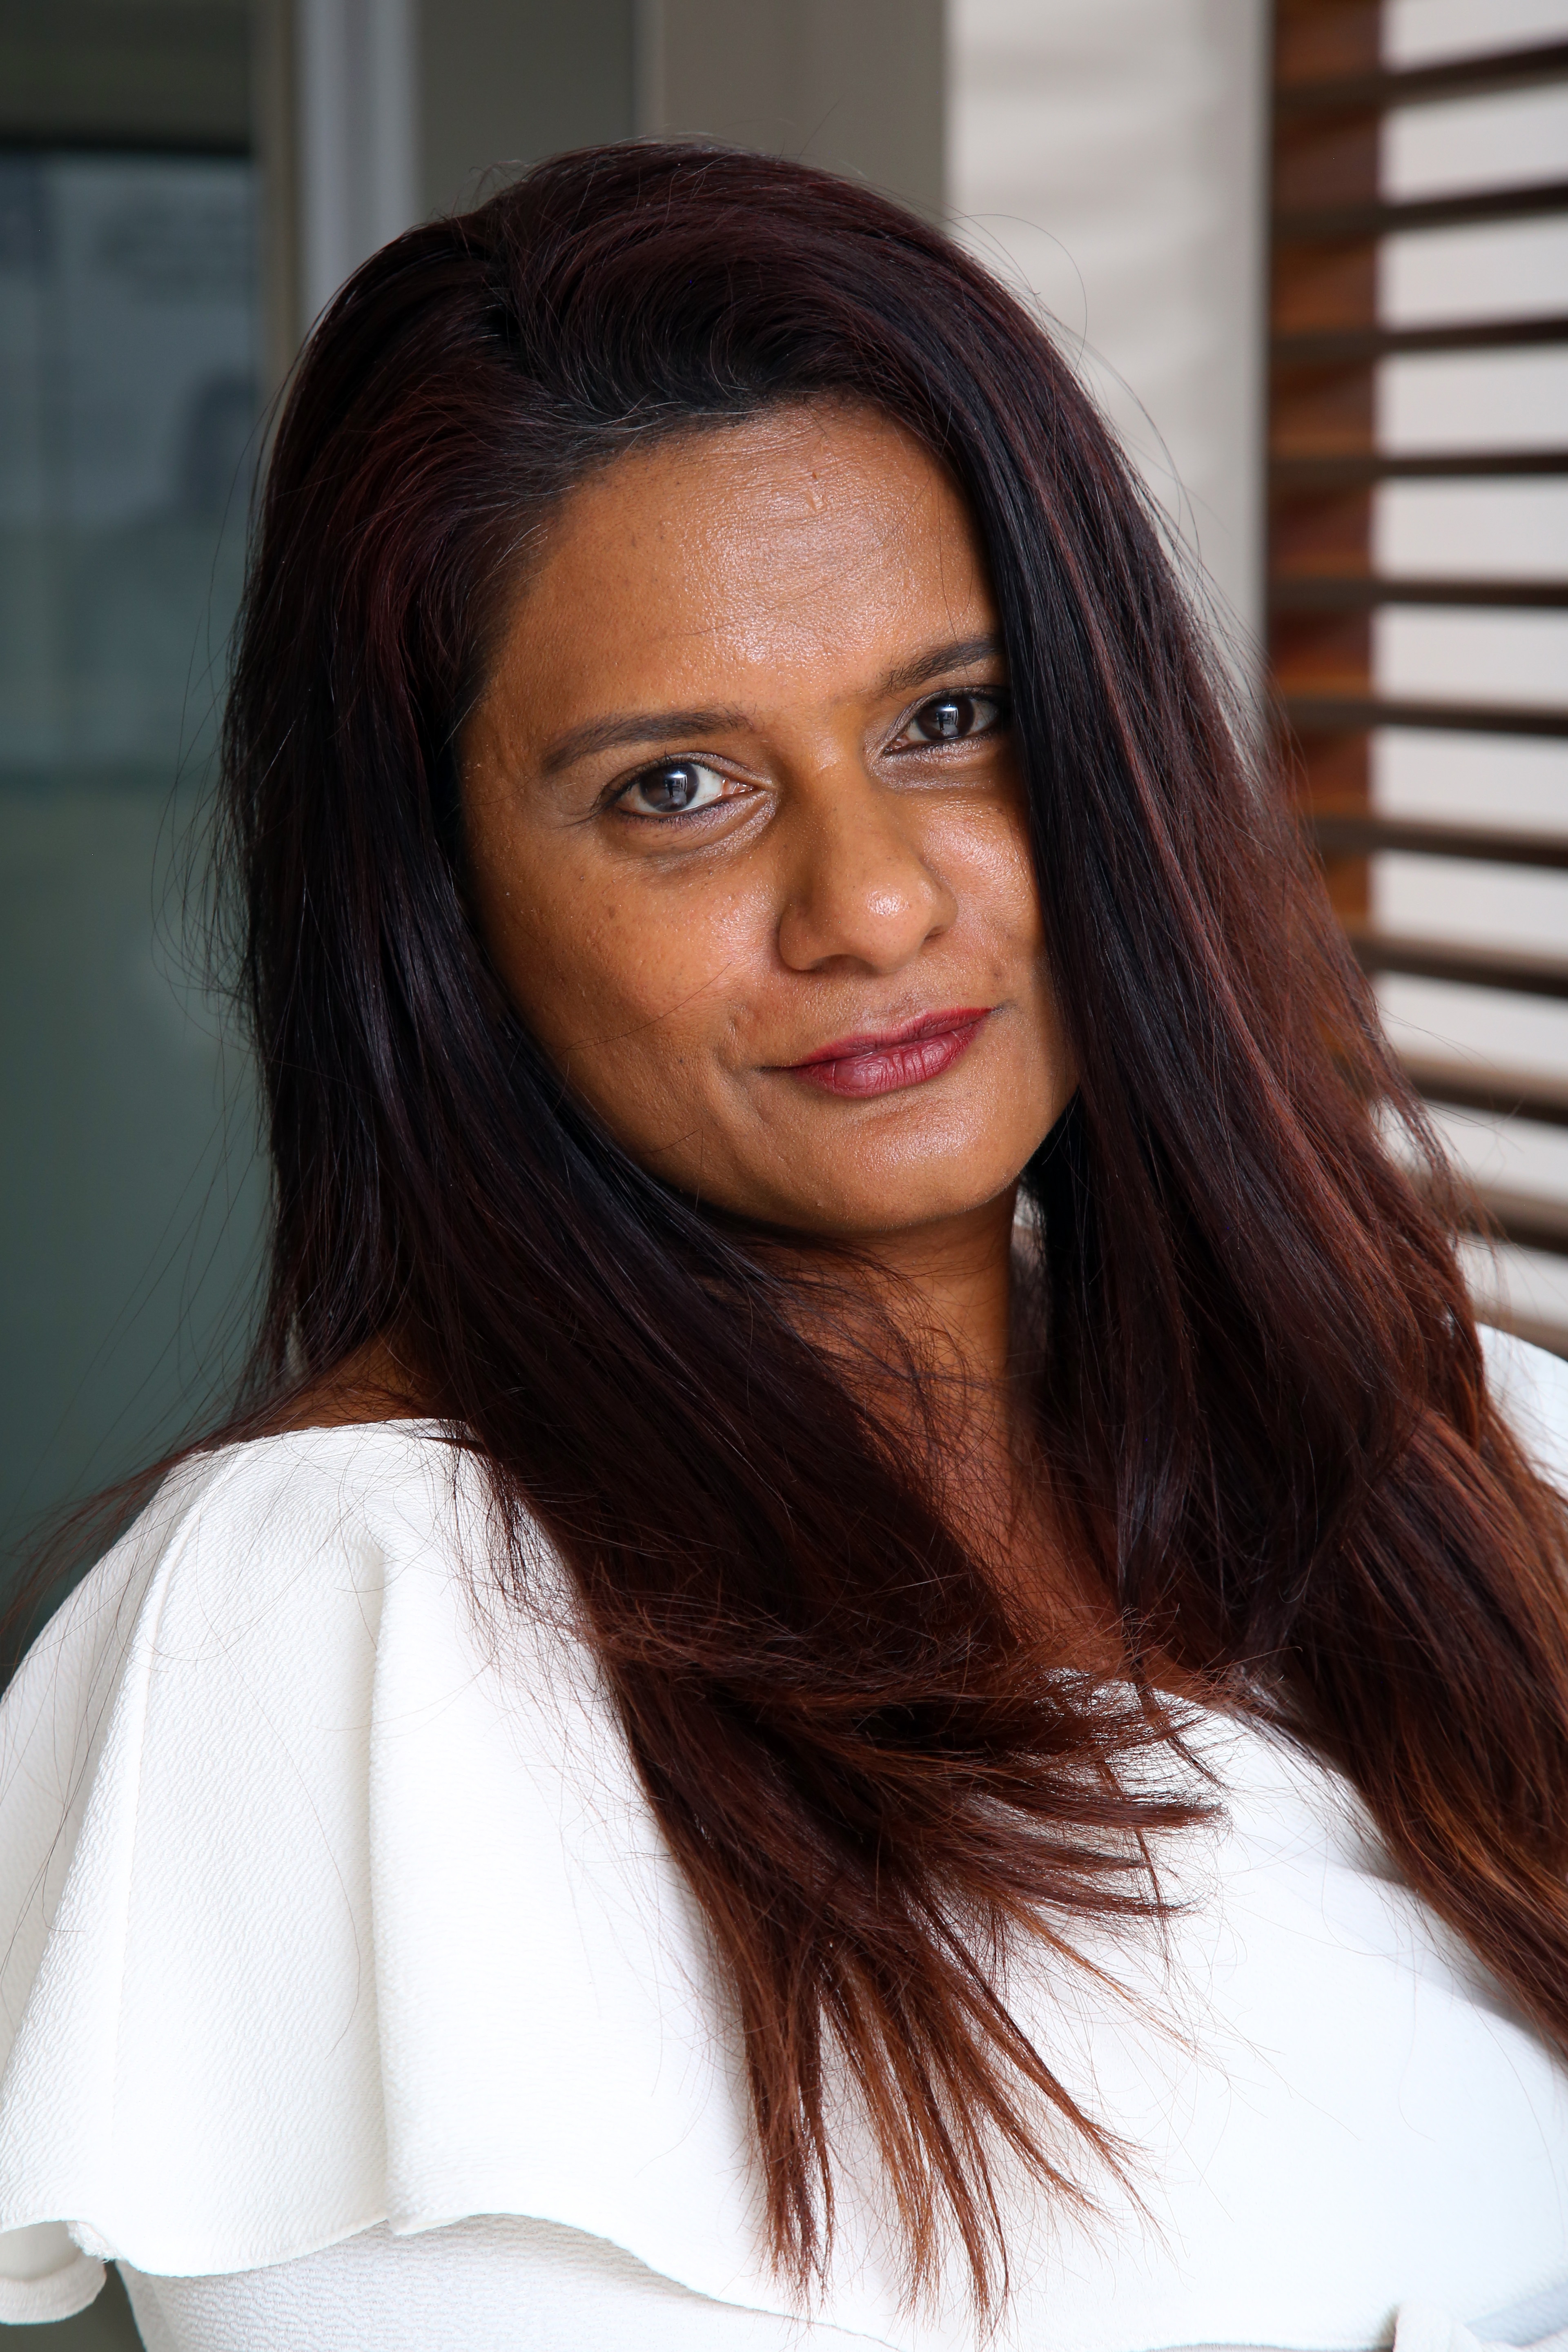 Interview with Marlany Naidoo, Head: Information Security & IT GRC, Mercantile Bank